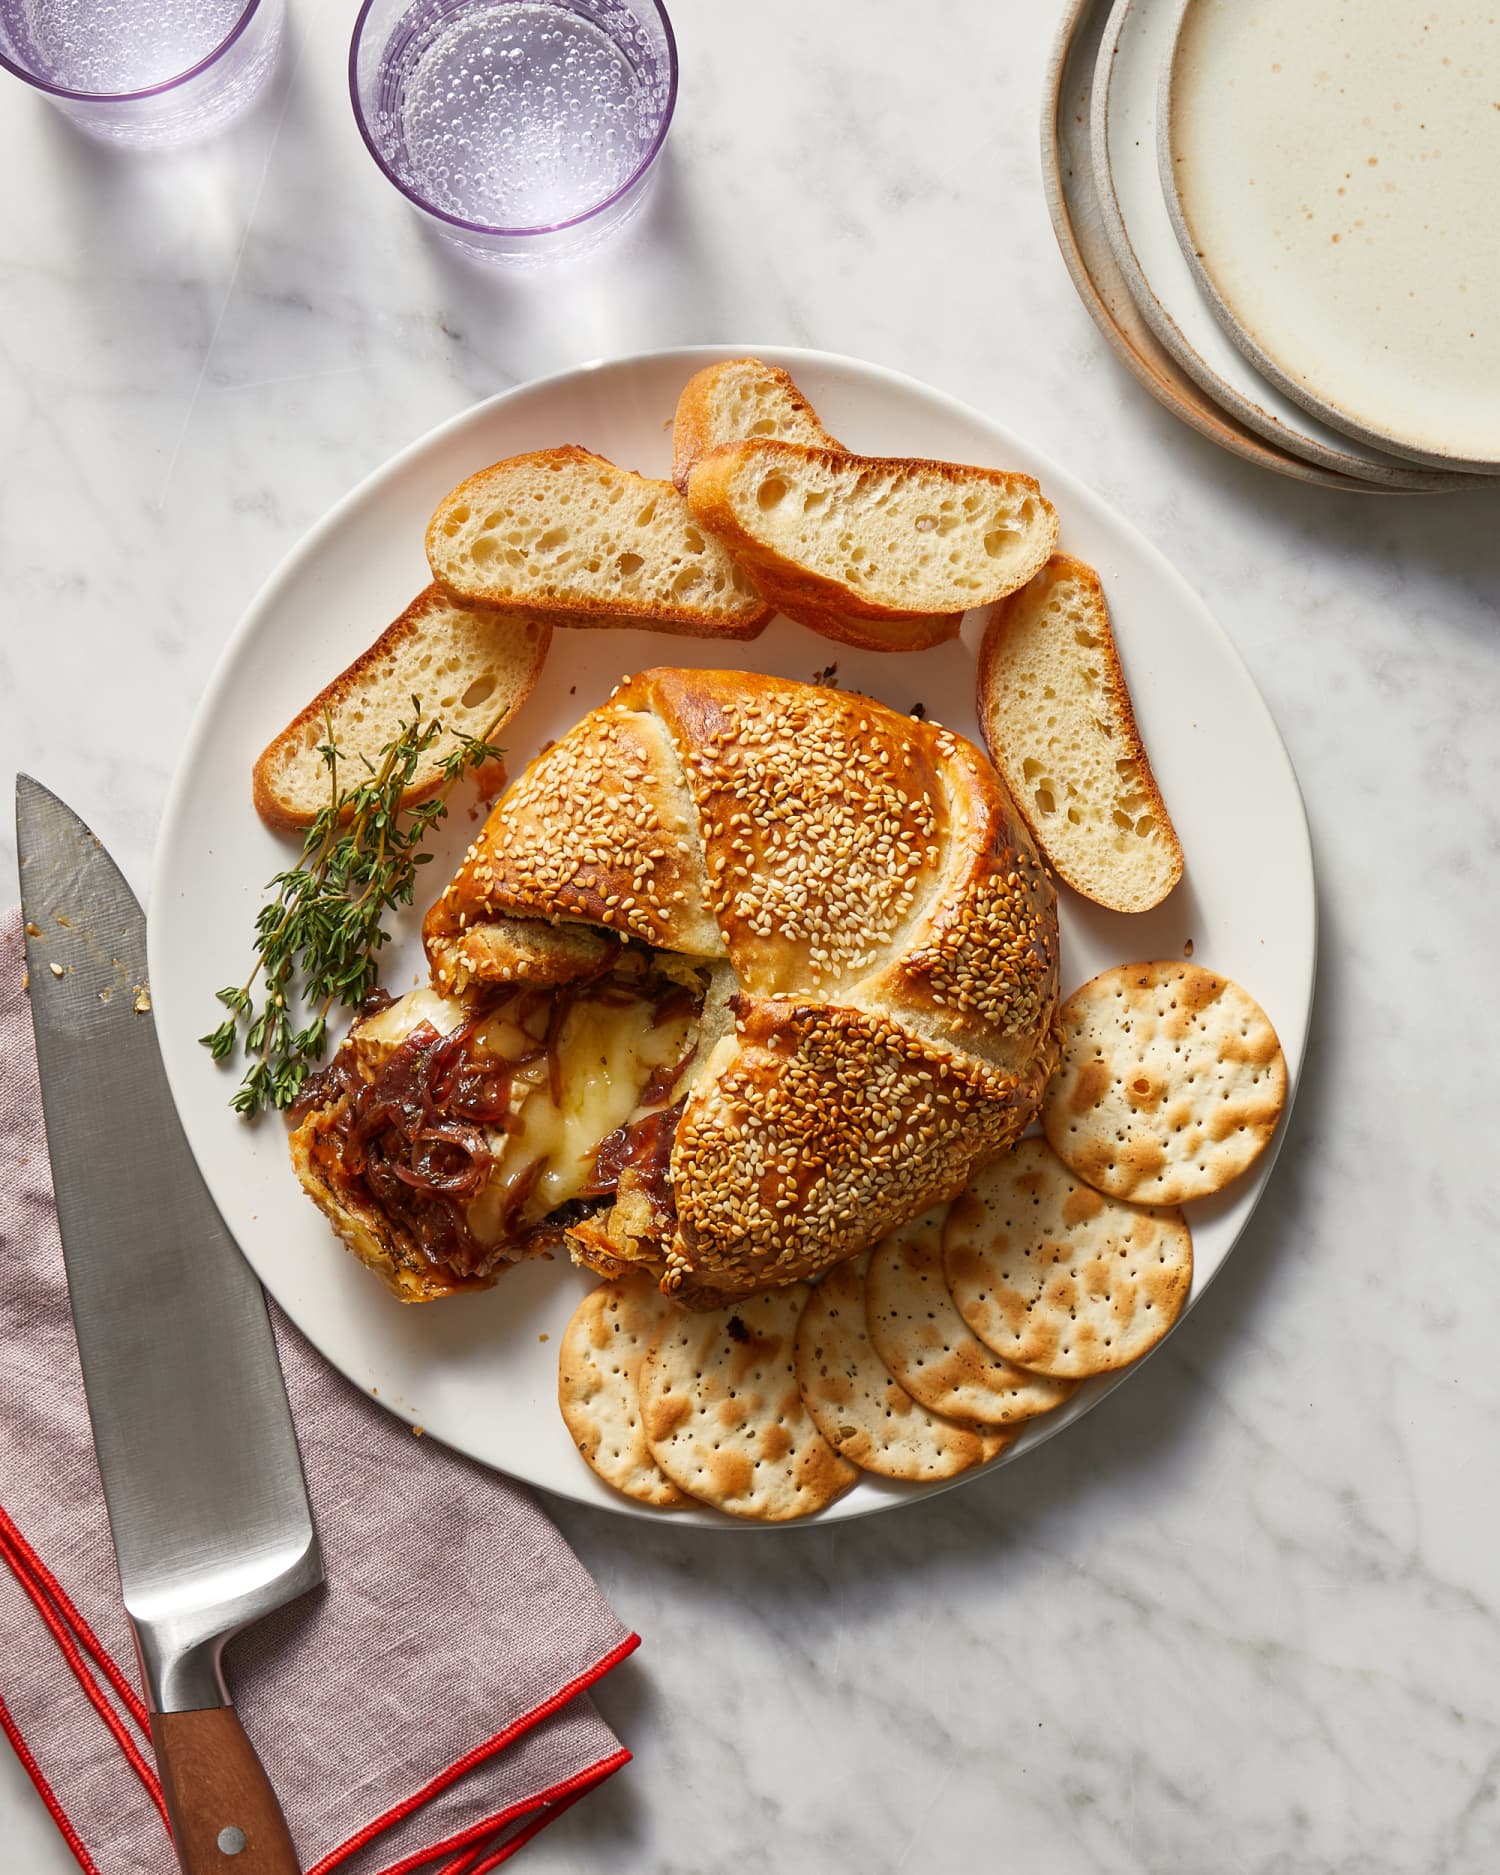 This Gooey Caramelized Onion Baked Brie Has French Onion Soup Vibes